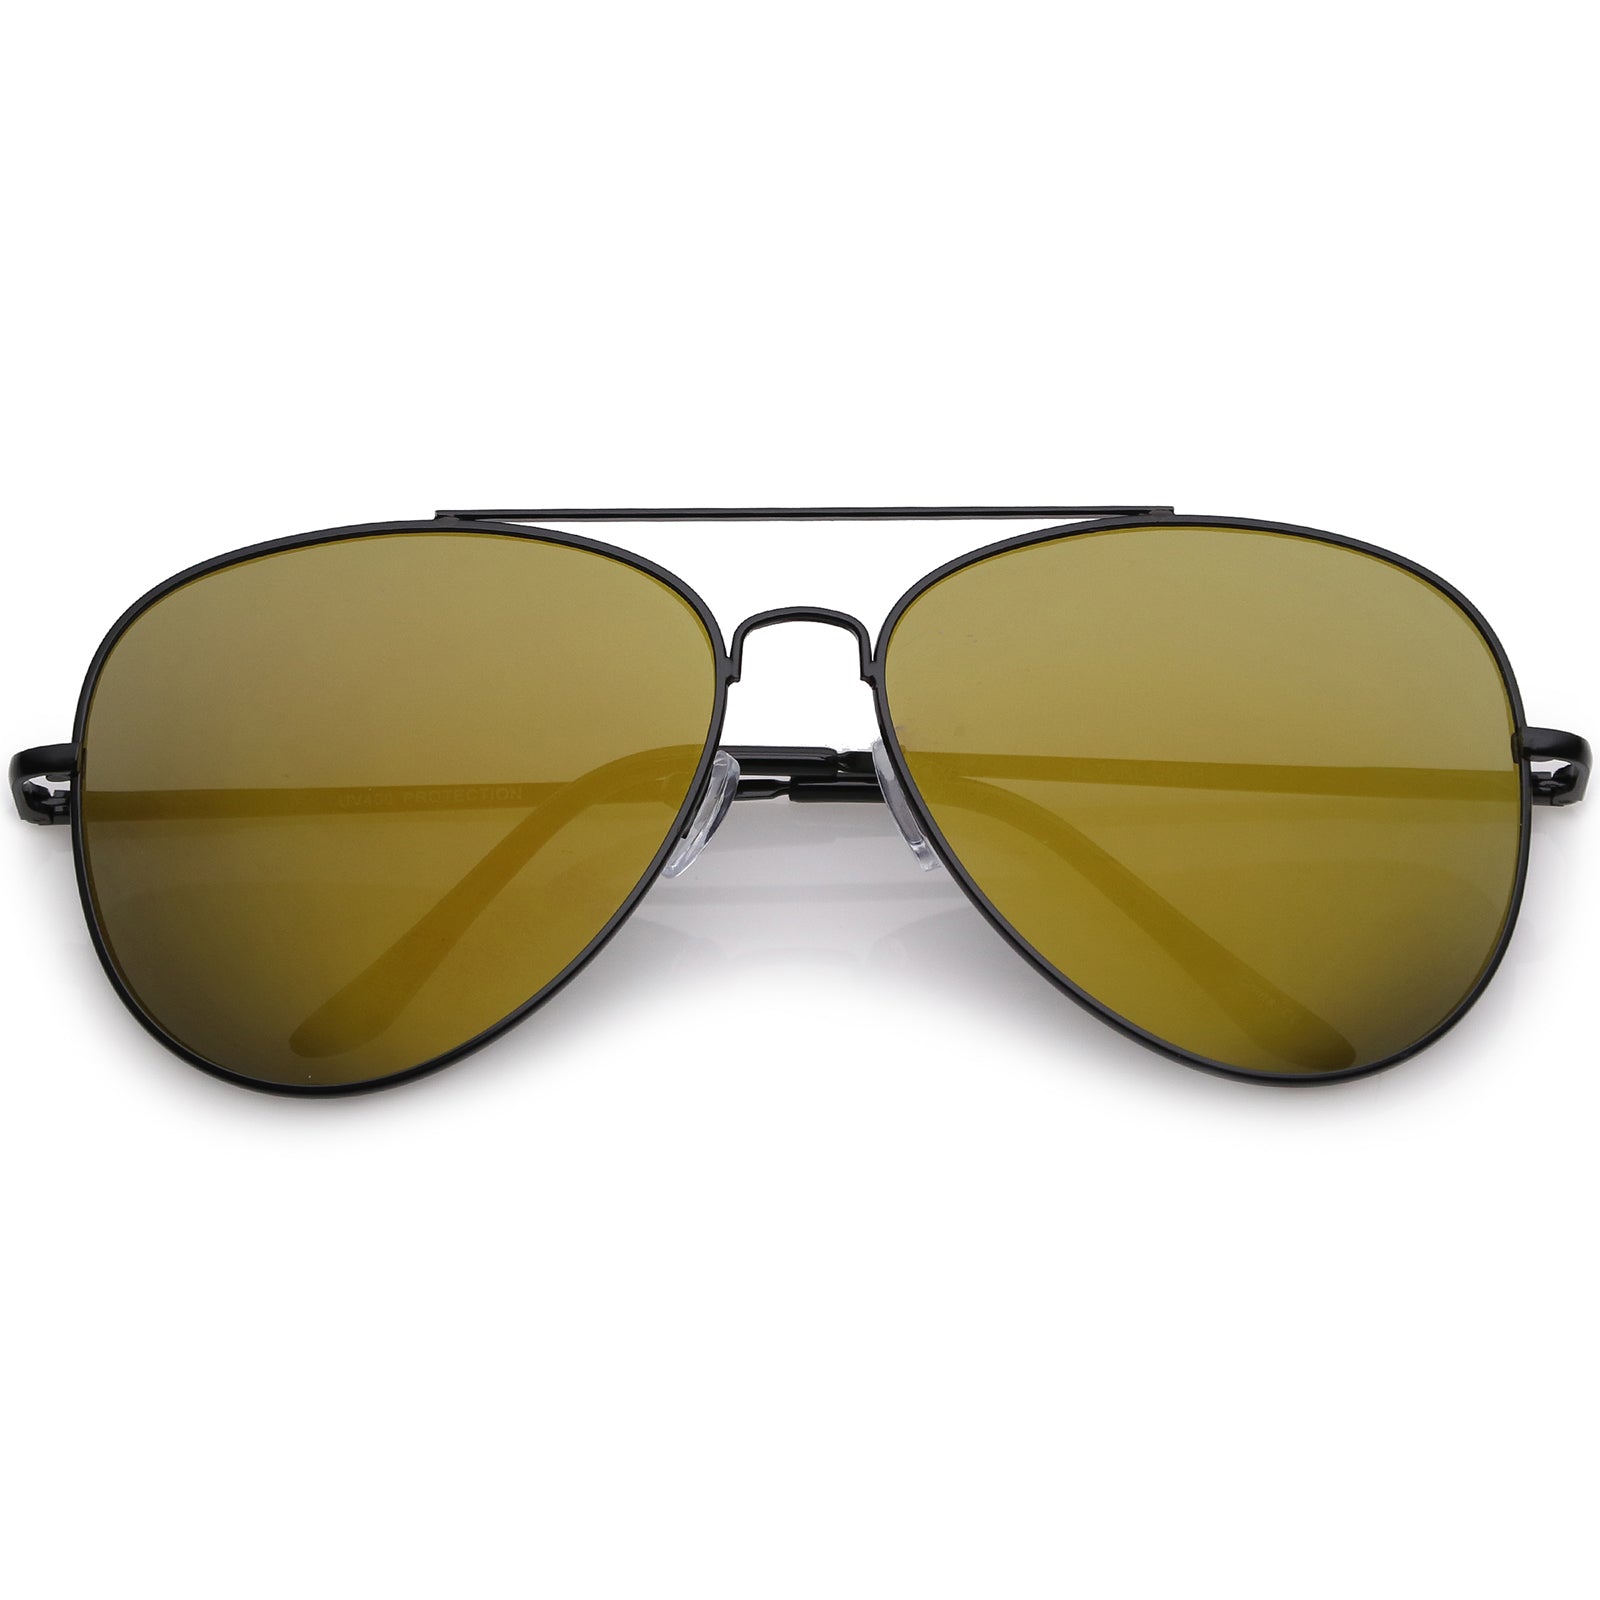 Waimea Vintage Square Sunglasses Outlet For Men And Women With